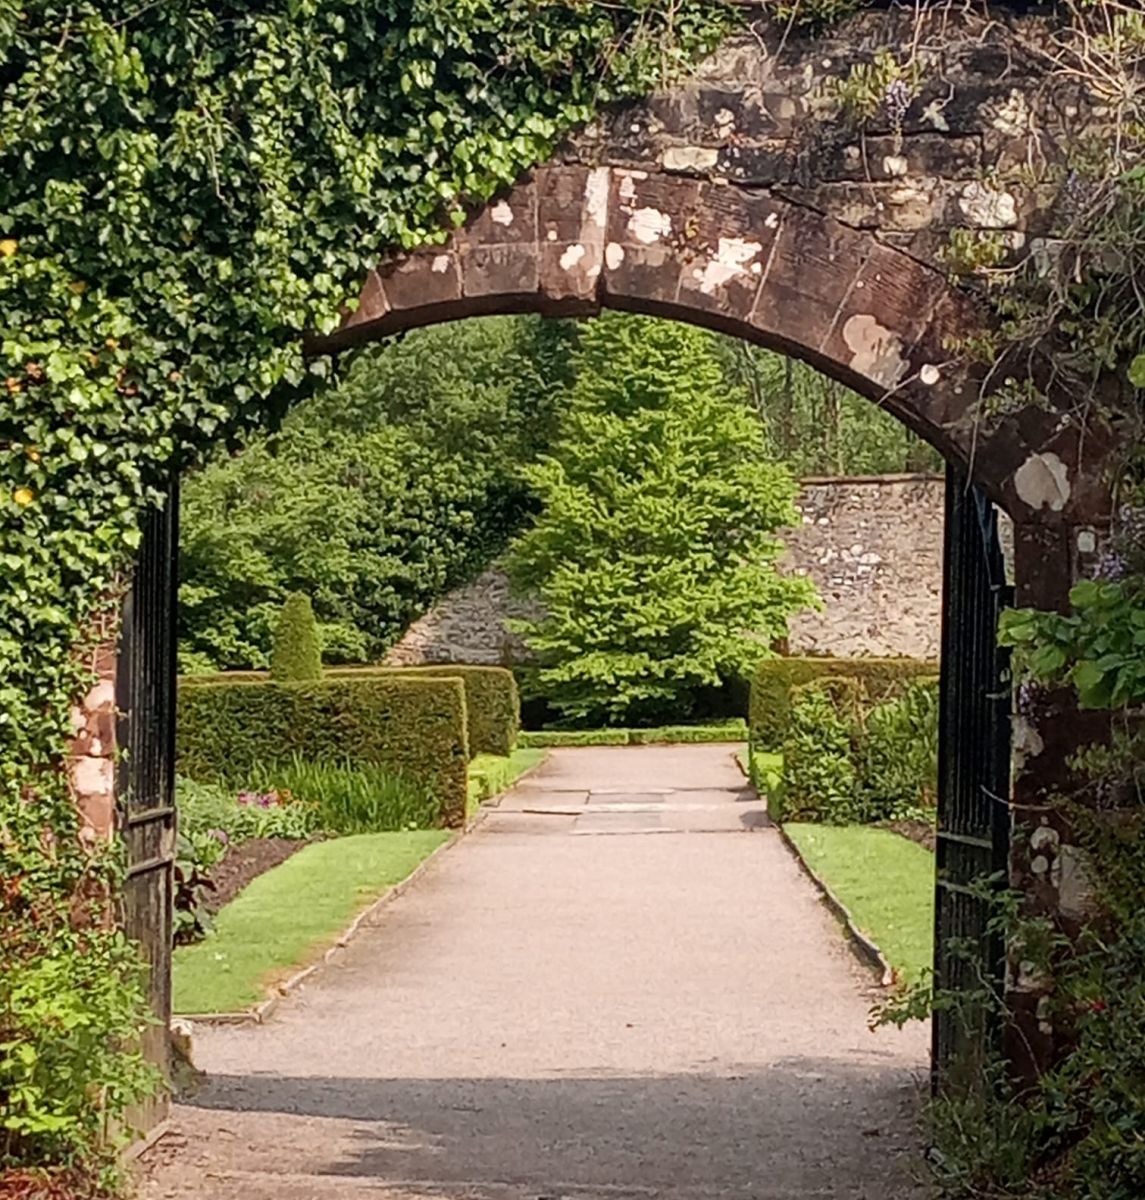 Entrance to the Walled Garden in Balloch Country Park